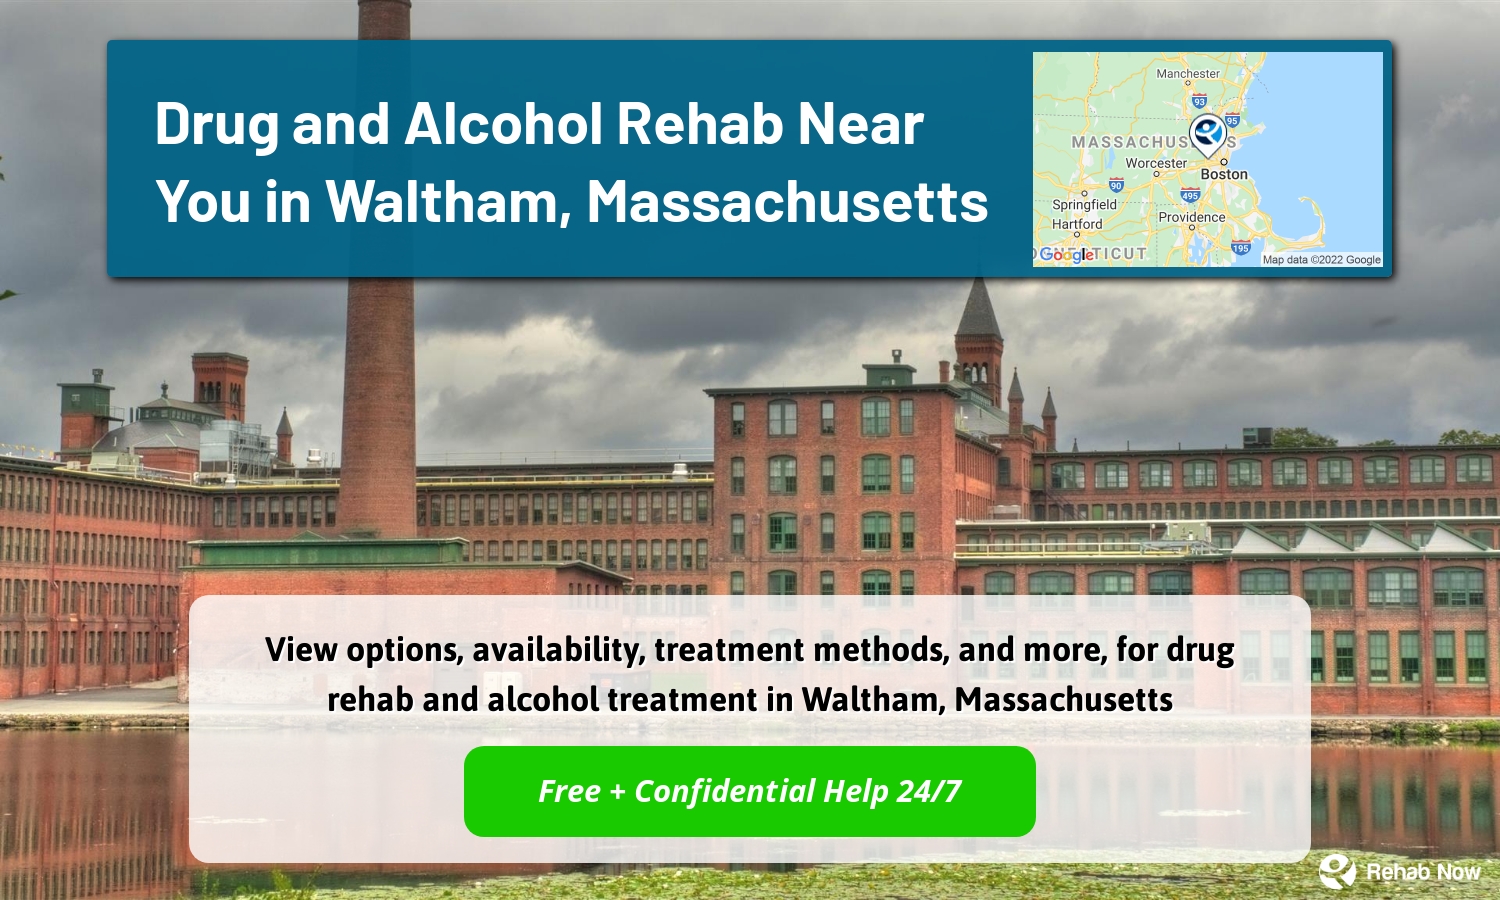 View options, availability, treatment methods, and more, for drug rehab and alcohol treatment in Waltham, Massachusetts